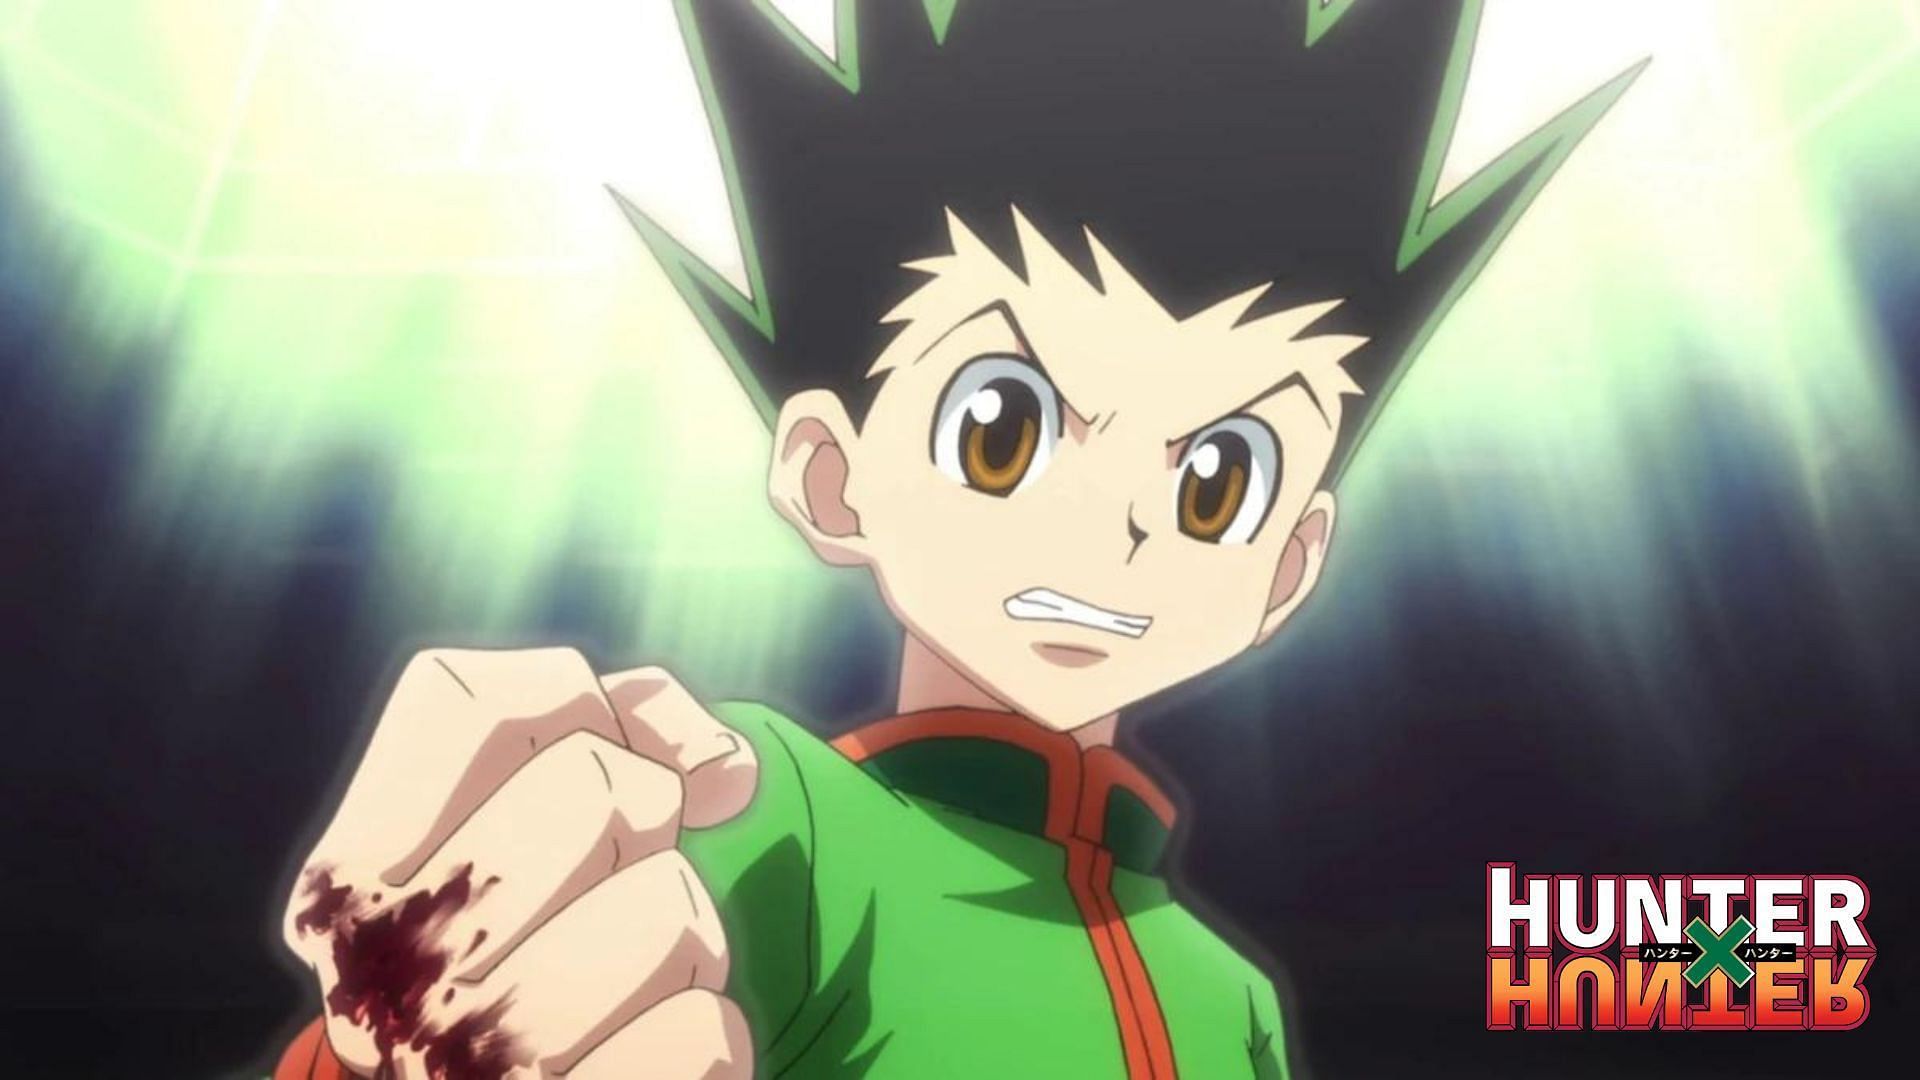 Hunter X Hunter: Where to pick up the manga after the anime?